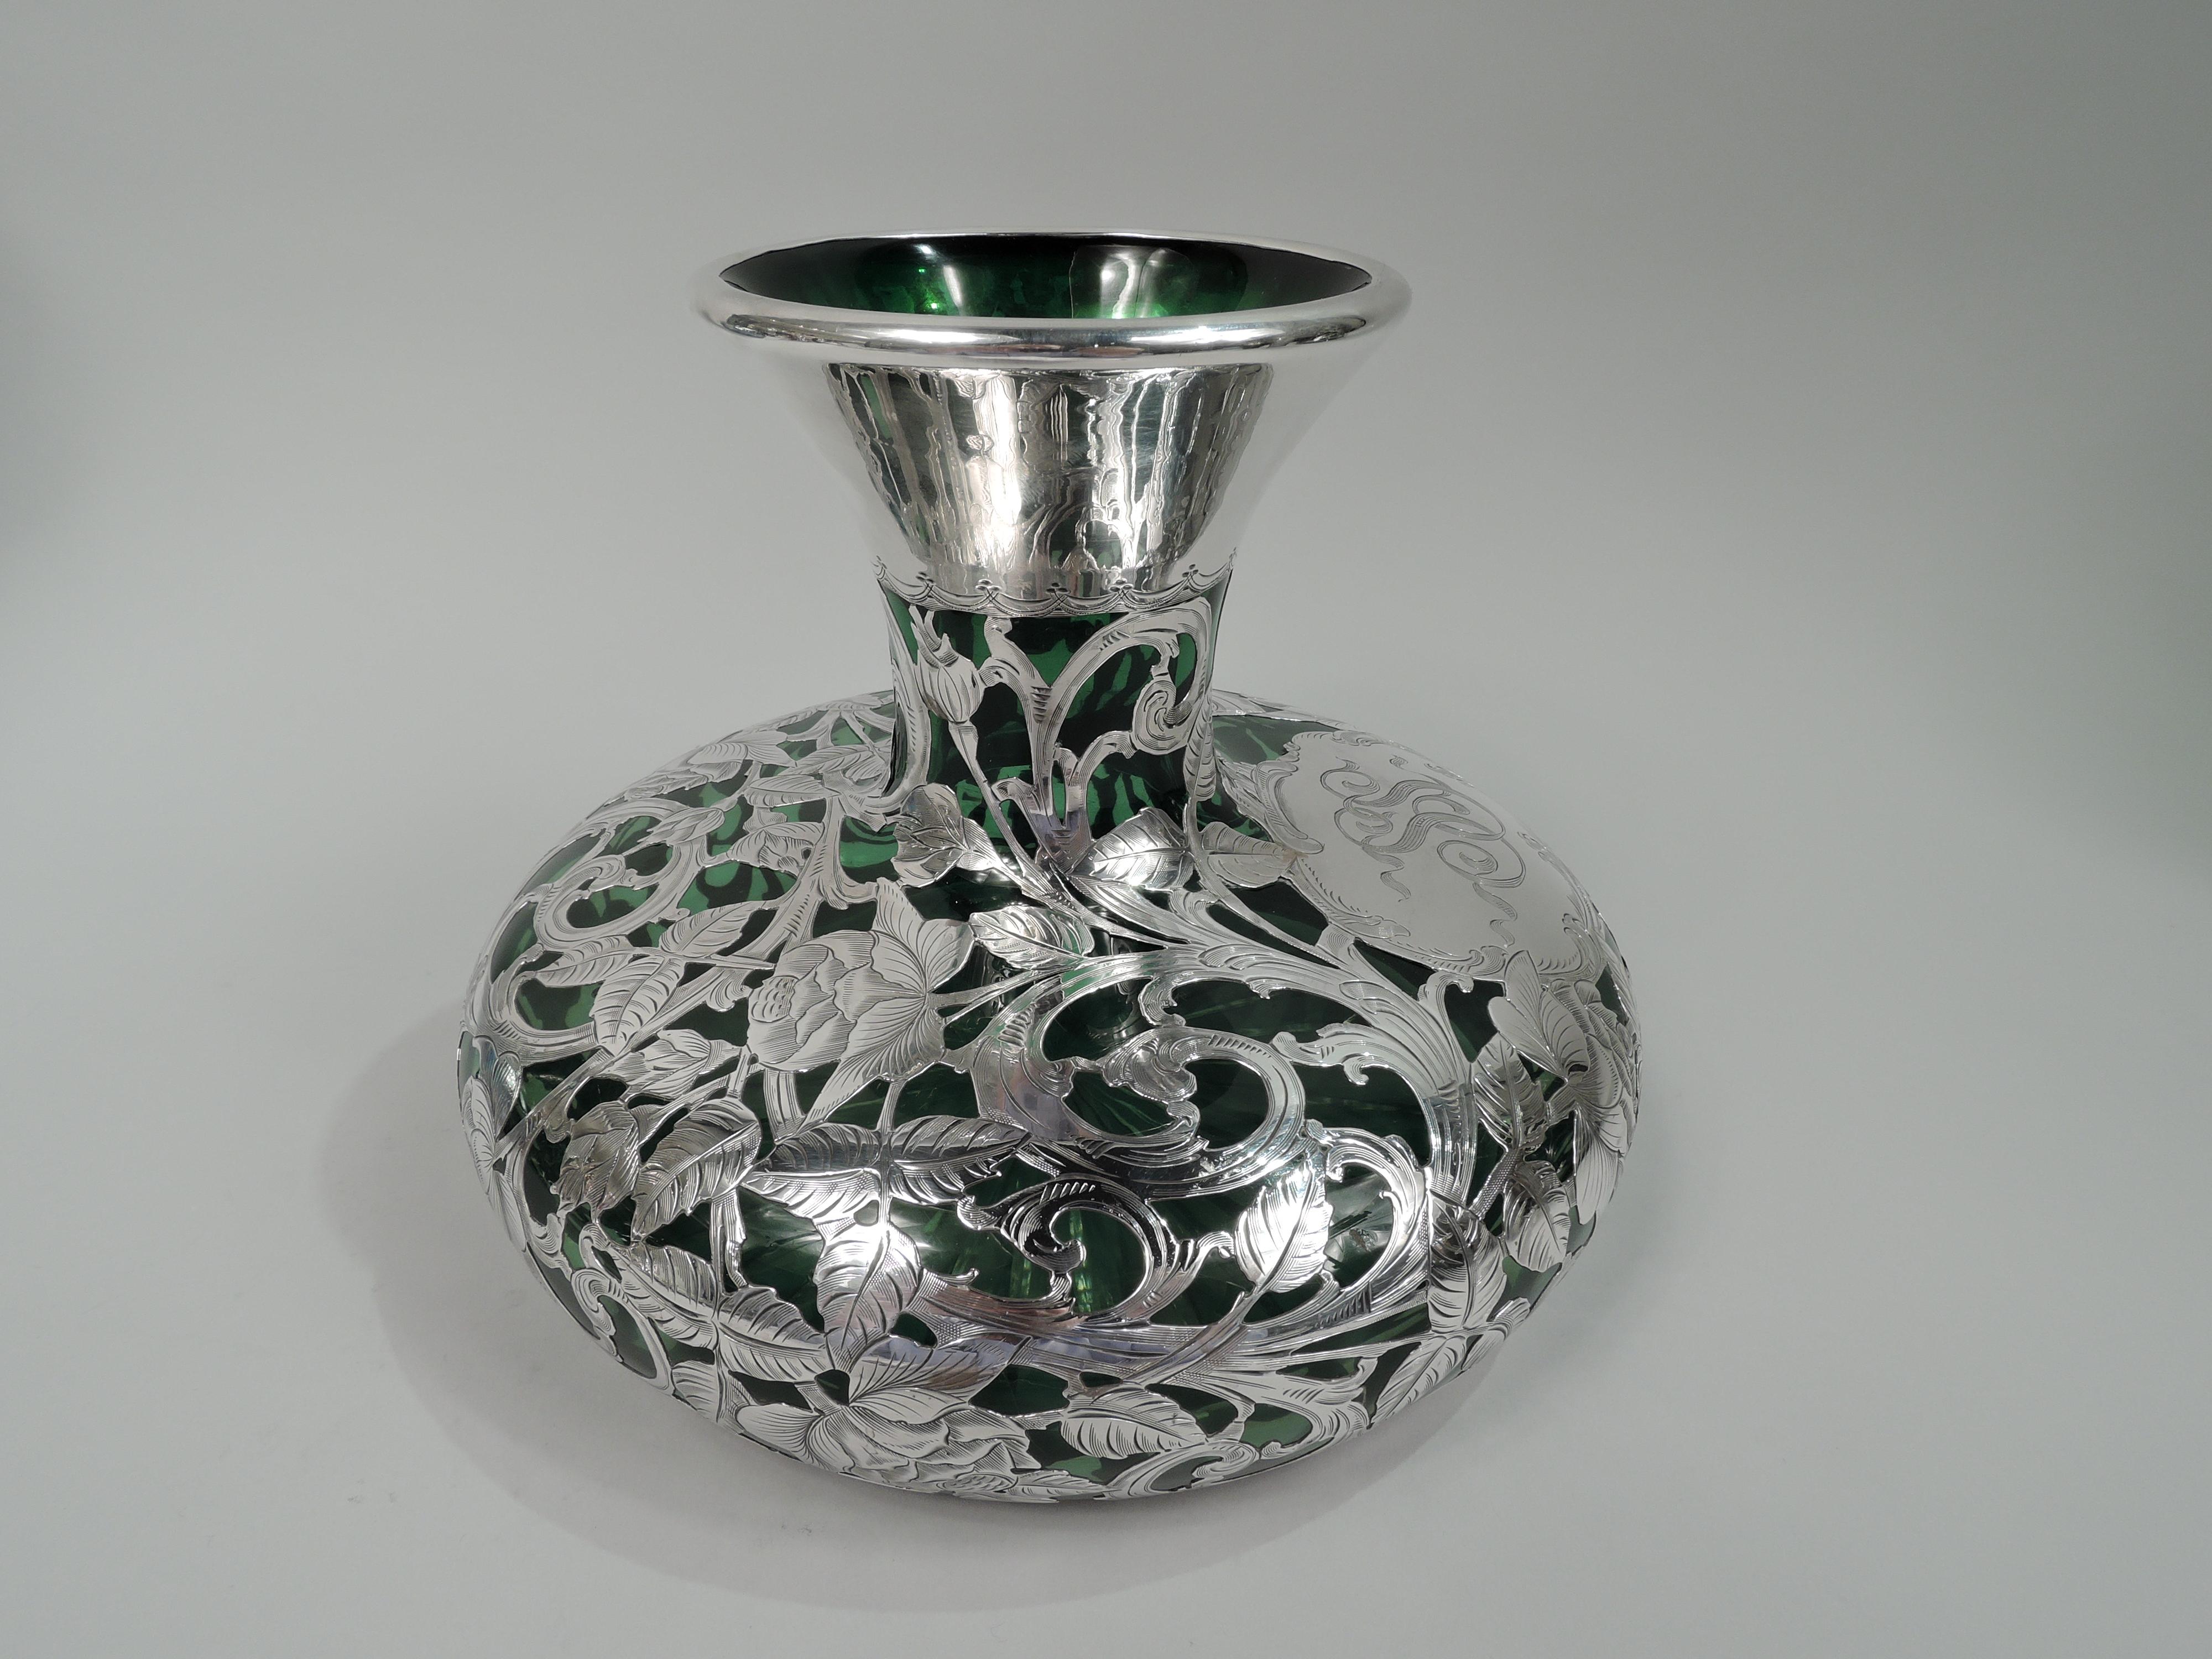 Turn-of-the-century Art Nouveau glass vase with engraved silver overlay. Made by Alvin in Providence. Tapering neck with bellied bowl. Overlay in form of entwined and tentacular tendrils. Glass is green. Silver marked including maker’s stamp and no.